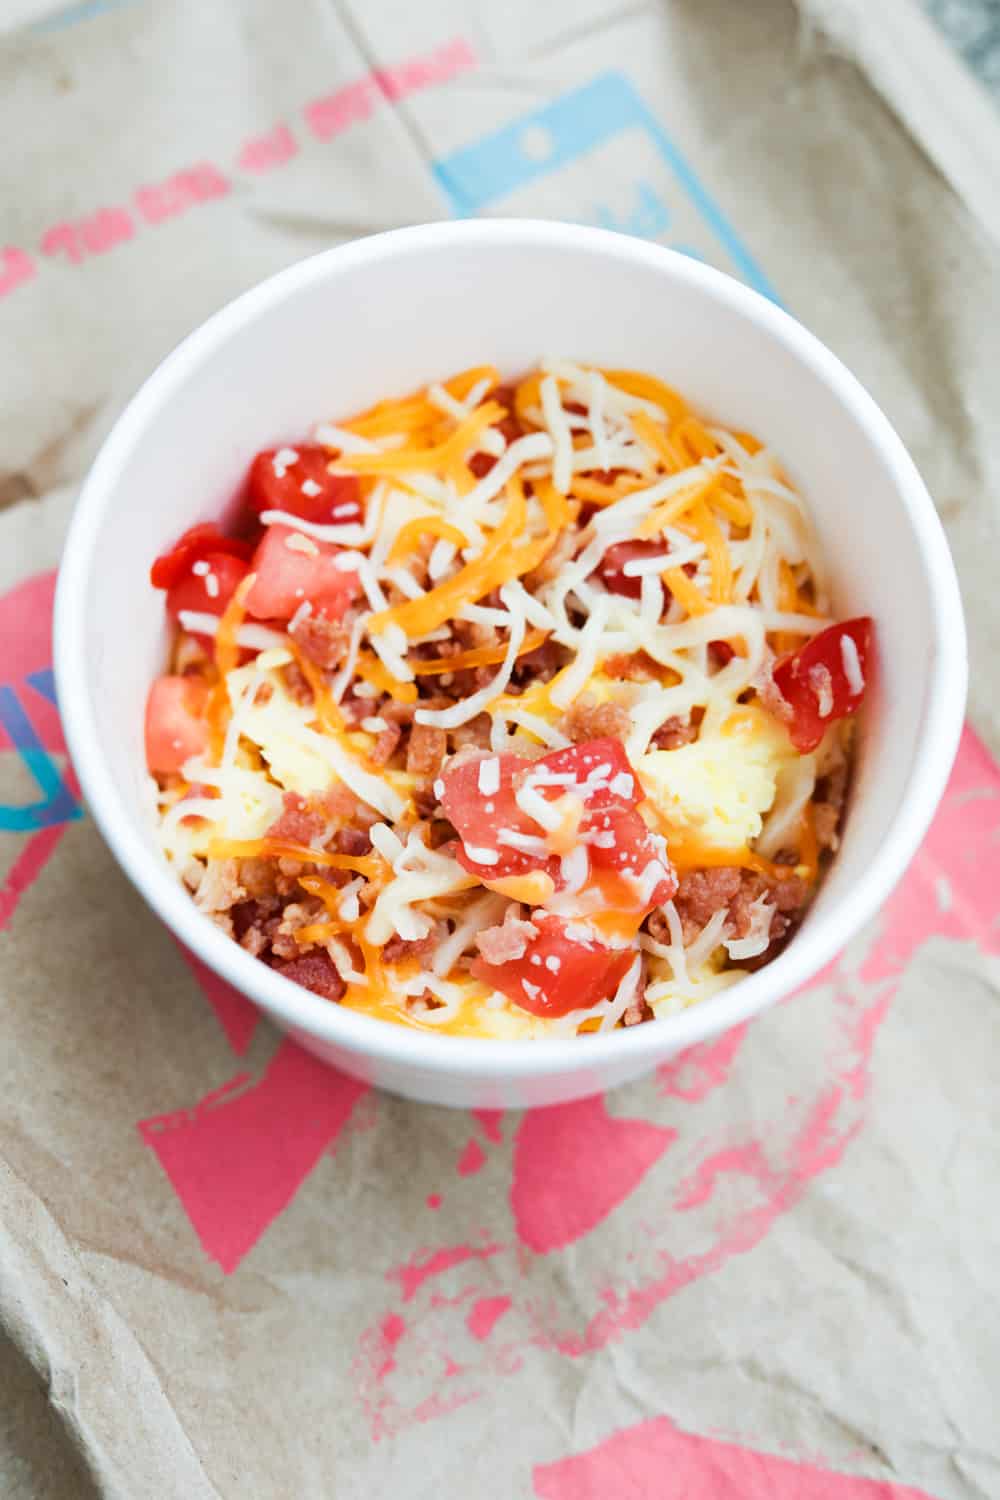 A white cup with shredded cheese, egg, tomatoes, and bacon in it. The cup is on a brown paper bag.